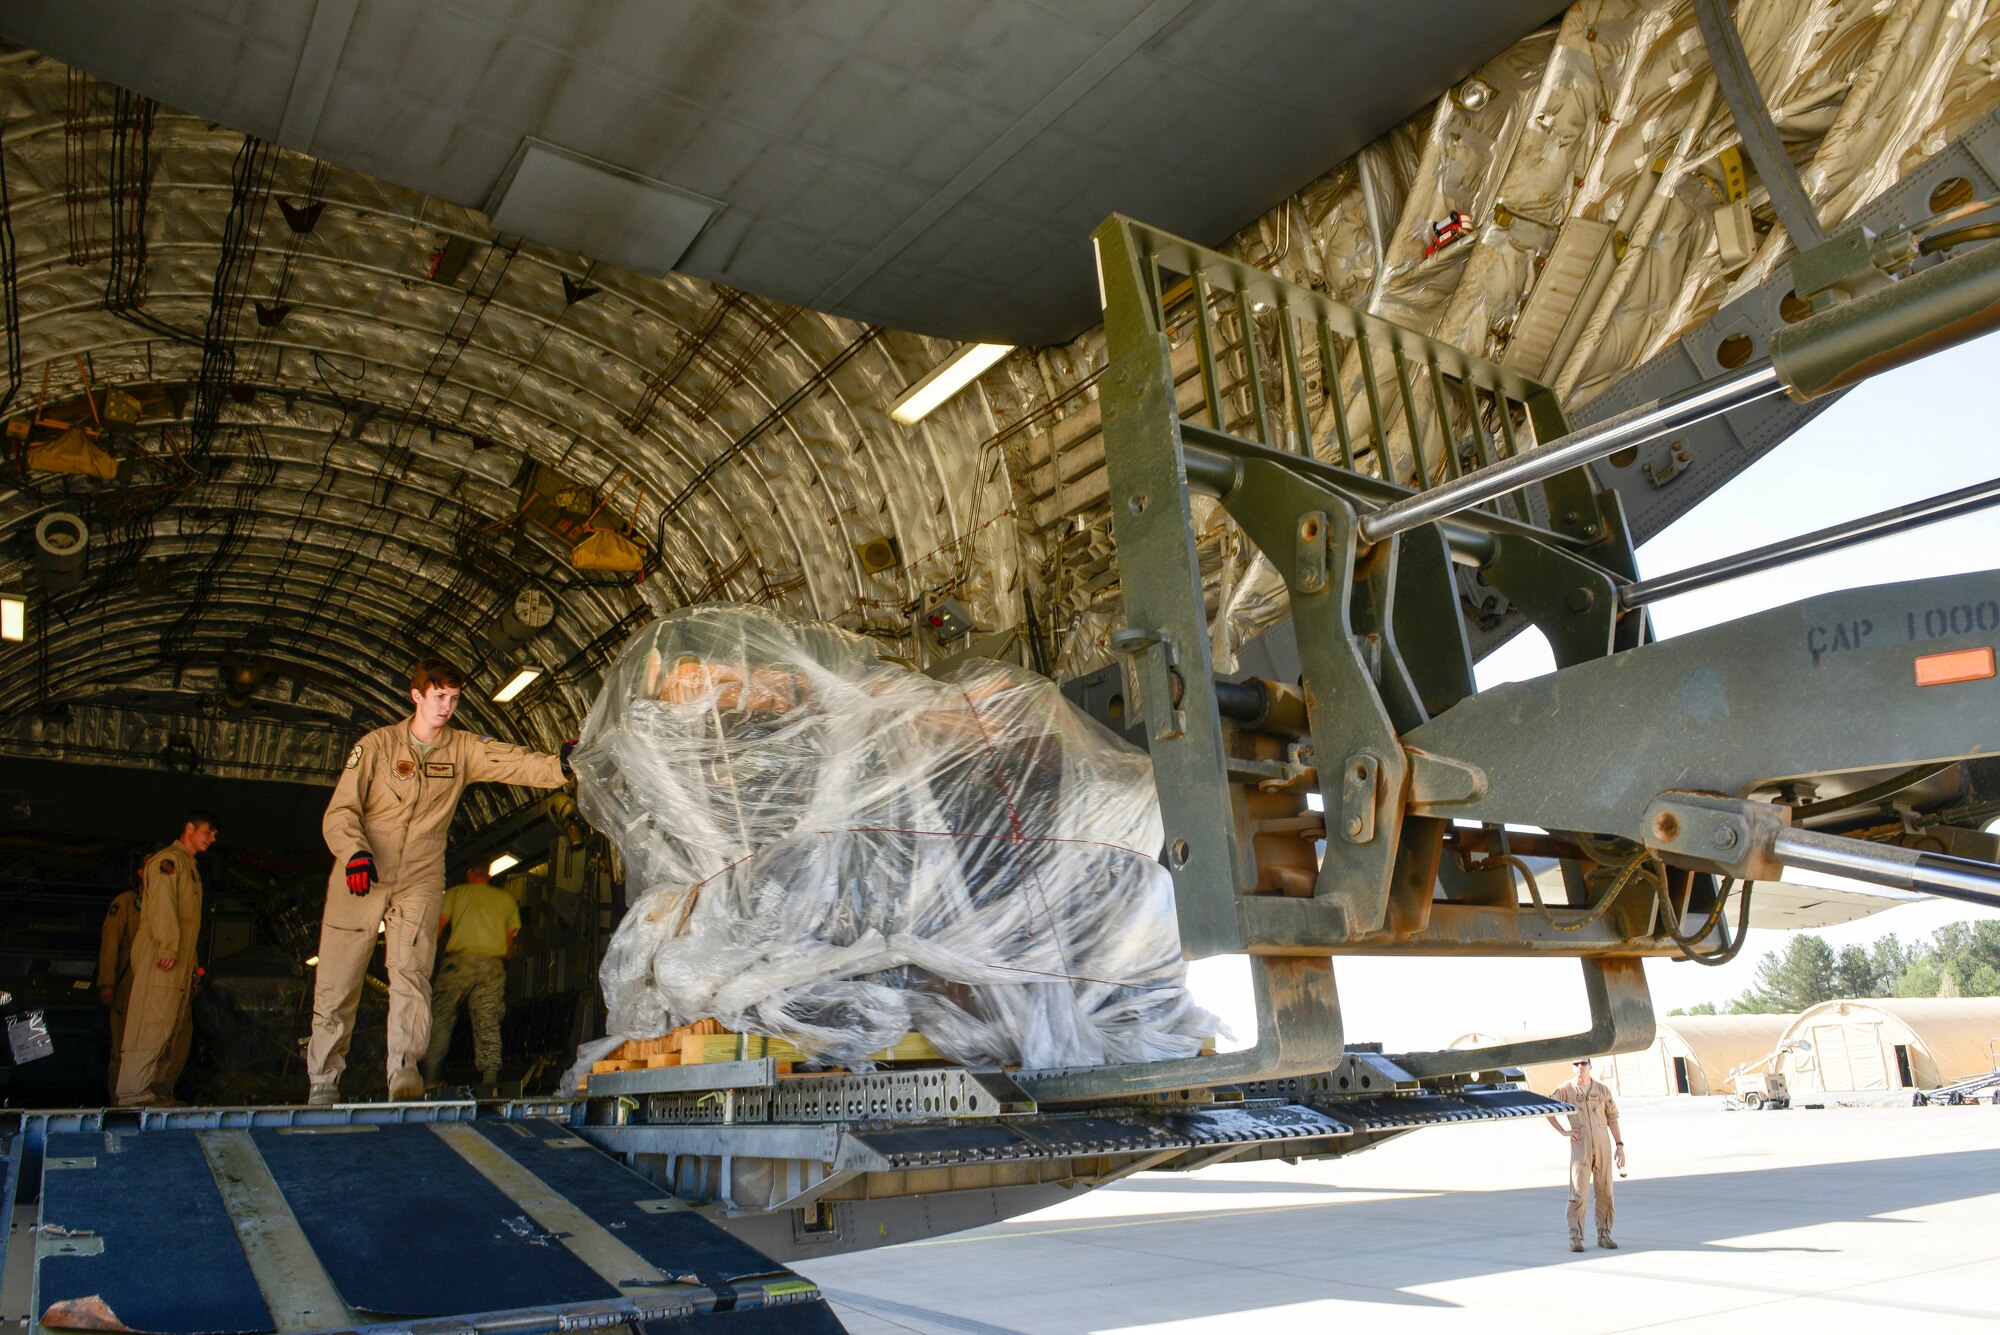 Senior Airman Ashley Igulo, 14th Airlift Squadron loadmaster, off-loads cargo, Sept. 28, 2015, in support of U.S. Air Forces Central Command personnel recovery mission at Diyarbakir Air Base, Turkey. The U.S. Air Force has delivered over 680 tons of cargo to Diyarbakir Air Base to prepare for the personnel recovery operations. (U.S. Air Force photo by Airman 1st Class Cory W. Bush/Released)
